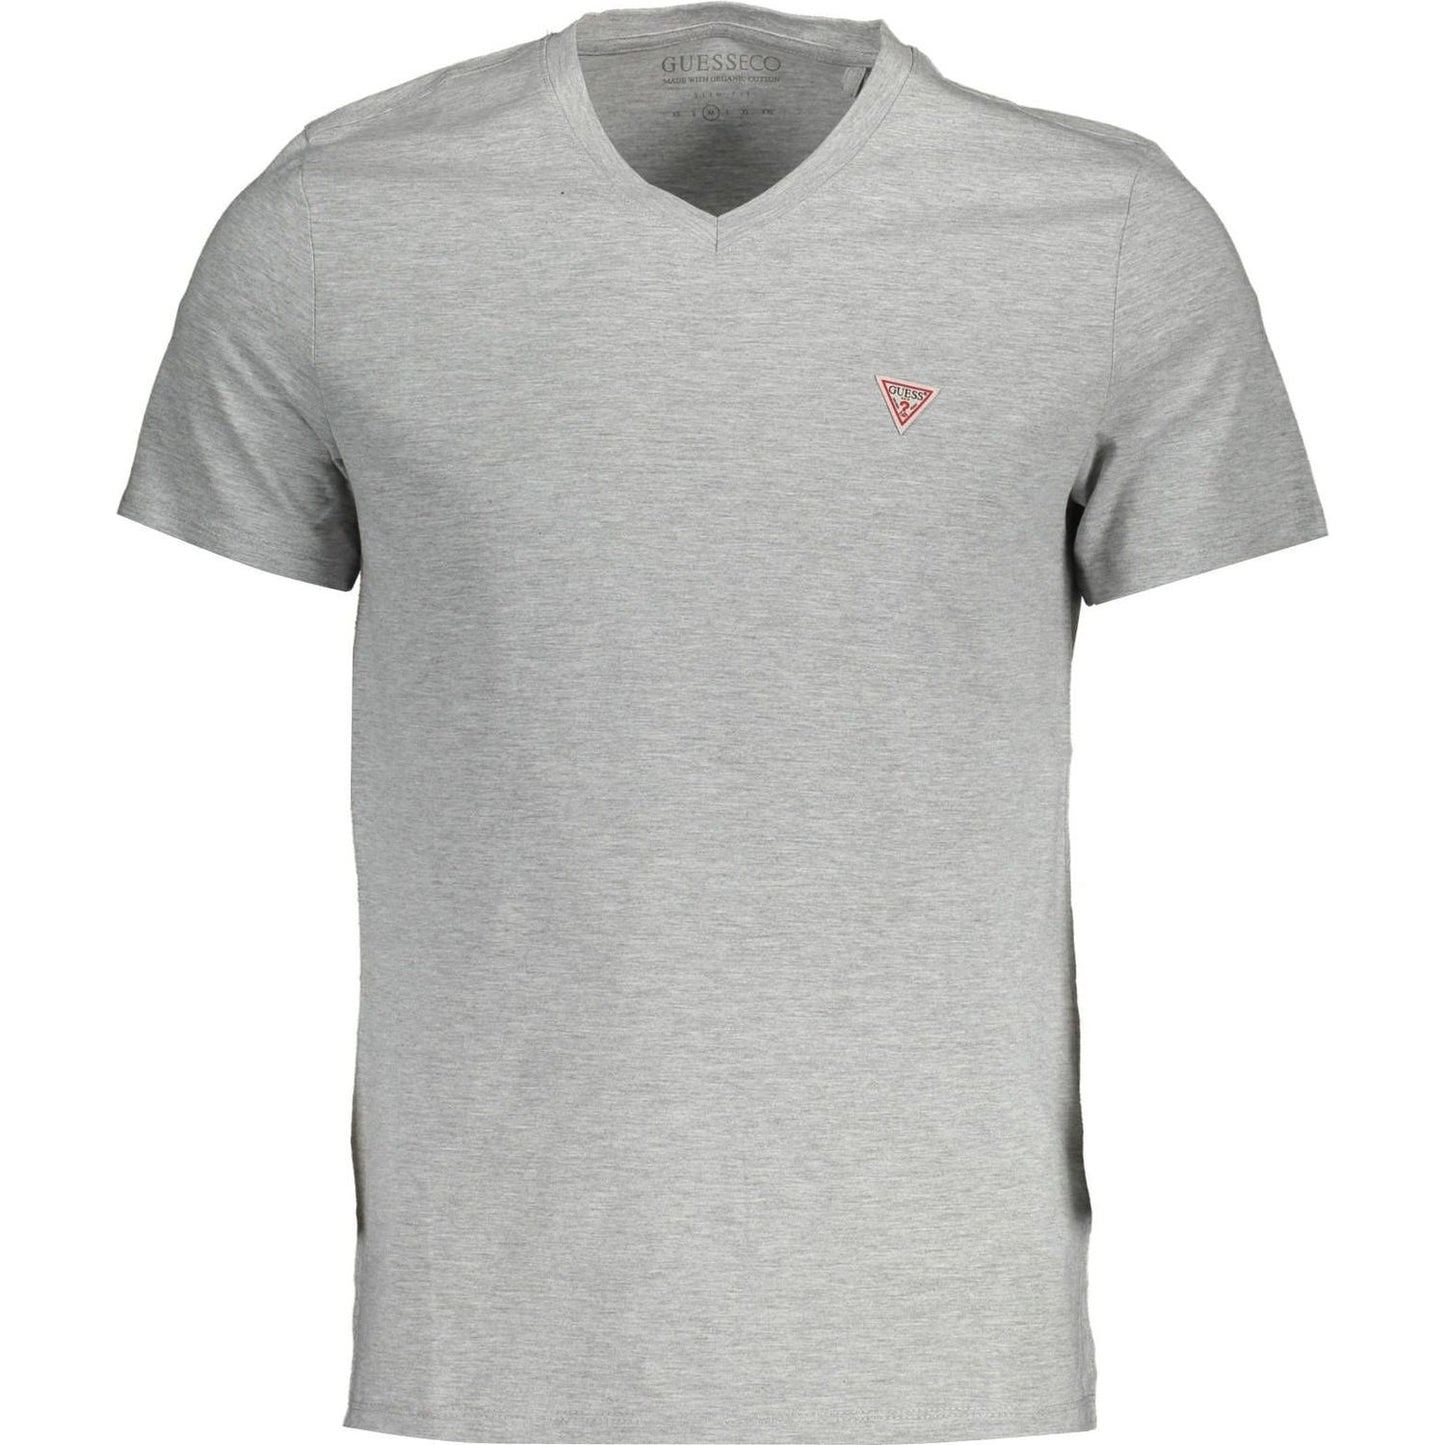 Guess Jeans Sleek Slim Fit V-Neck Tee in Gray sleek-slim-fit-v-neck-tee-in-gray